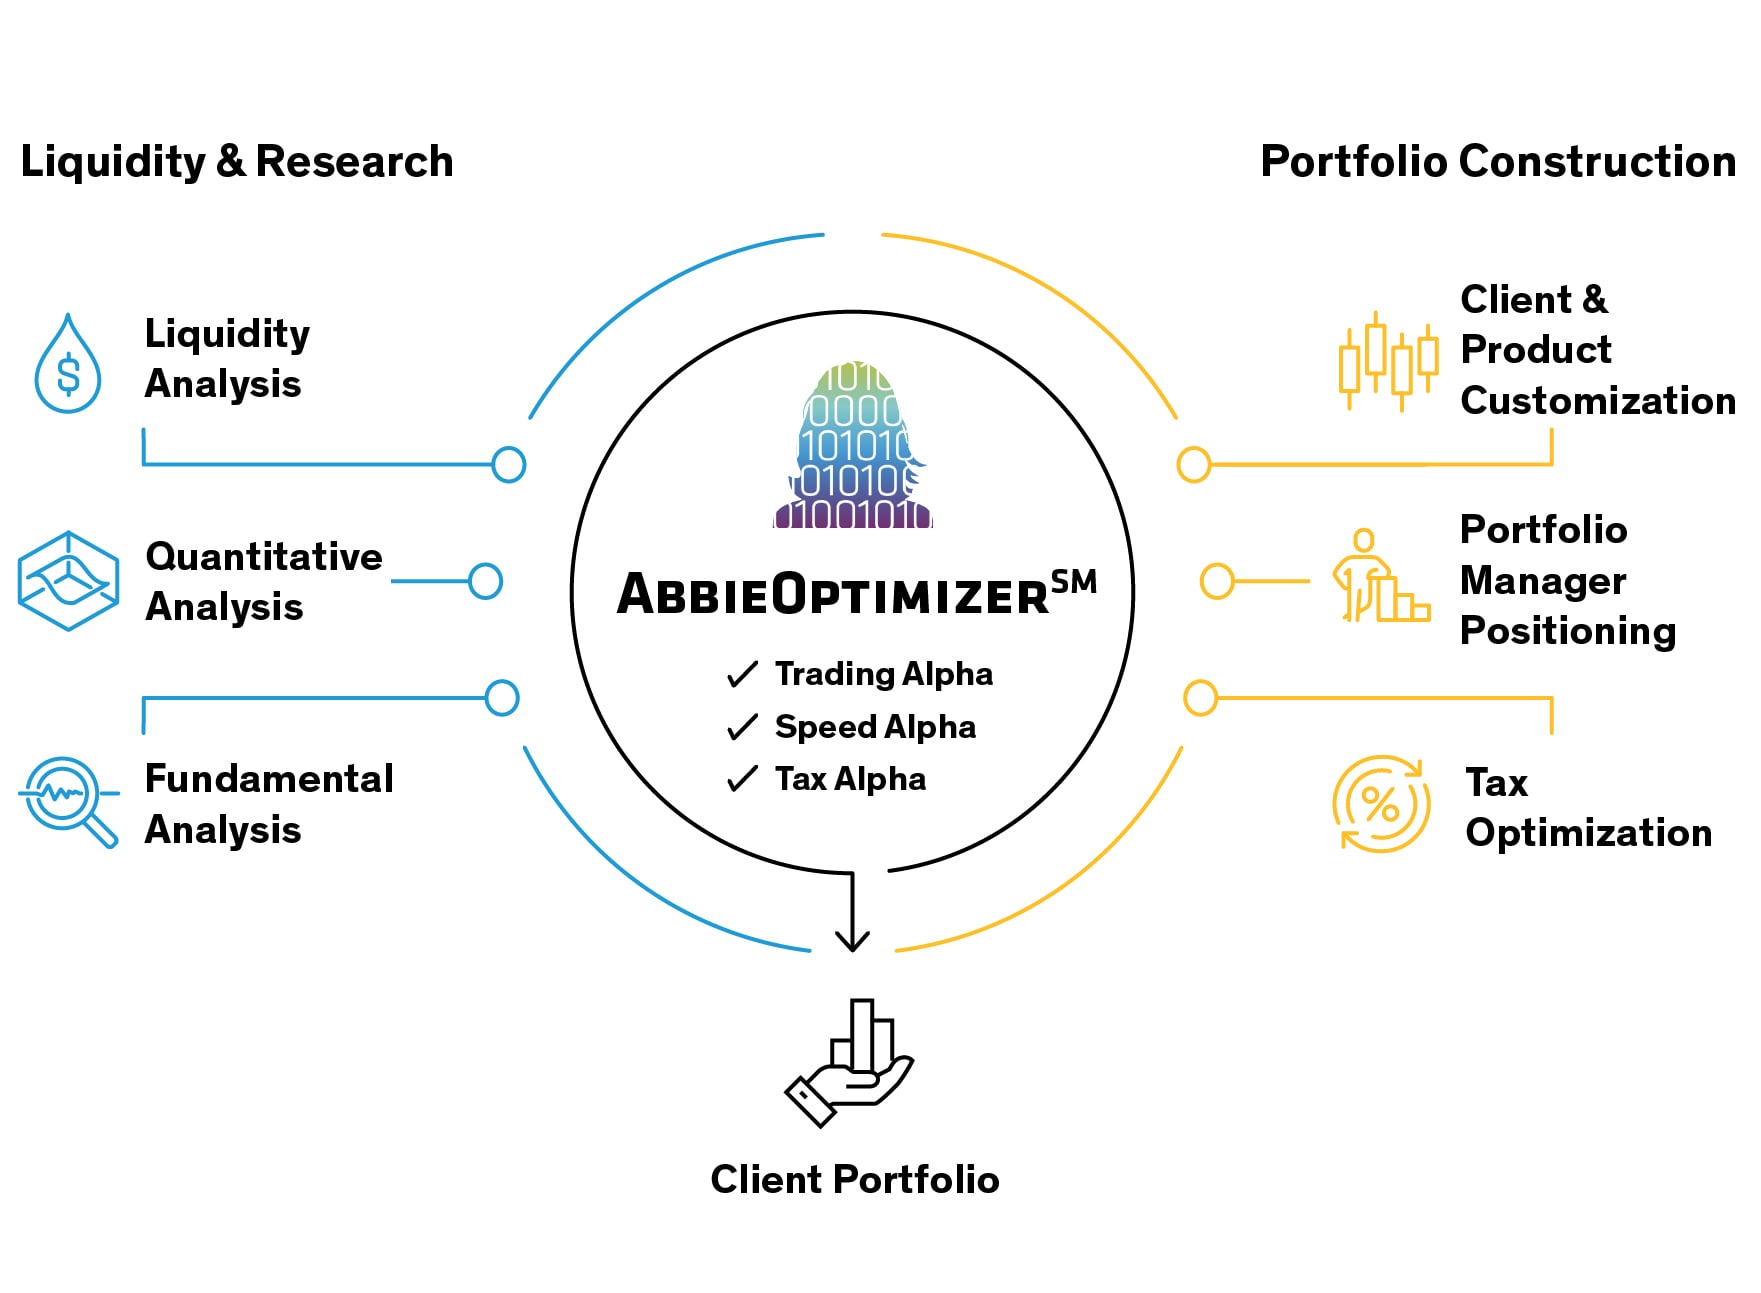 AbbieOptimizer looks at Liquidity and Research including liquidity, quantitative, and fundamental analyses and portfolio construction which includes client & product customization, portfolio manager position and tax optimization. These factors pull in and create trading, speed, and tax alpha delivered to the client portfolio.